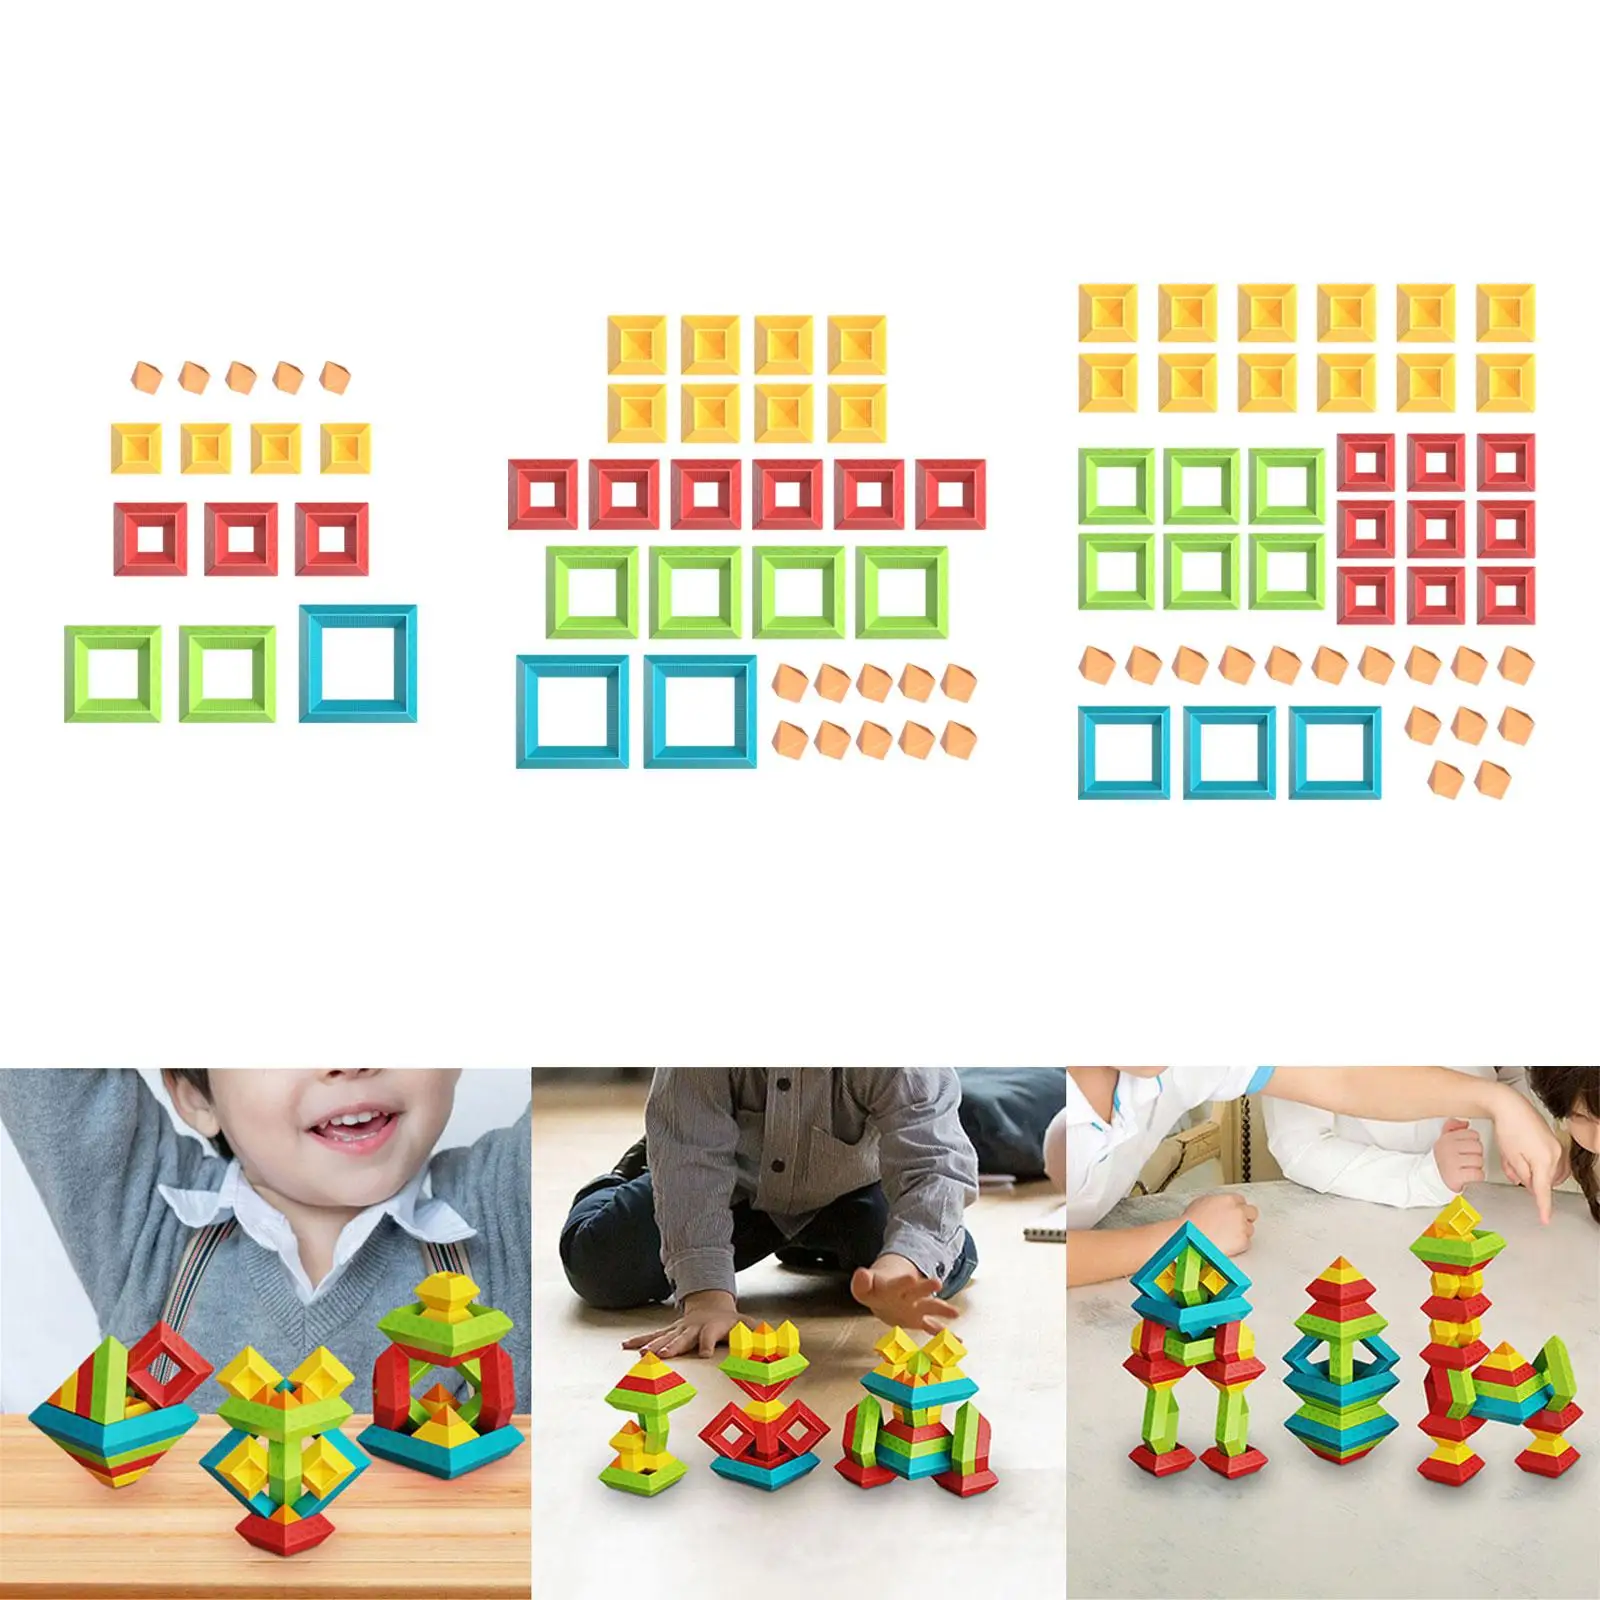 Baby Stacking Toys Preschool Learning Activities Pyramid Building Toys for 1 2 3 4 5 Year Old Kids Boys Girls Toddlers Children